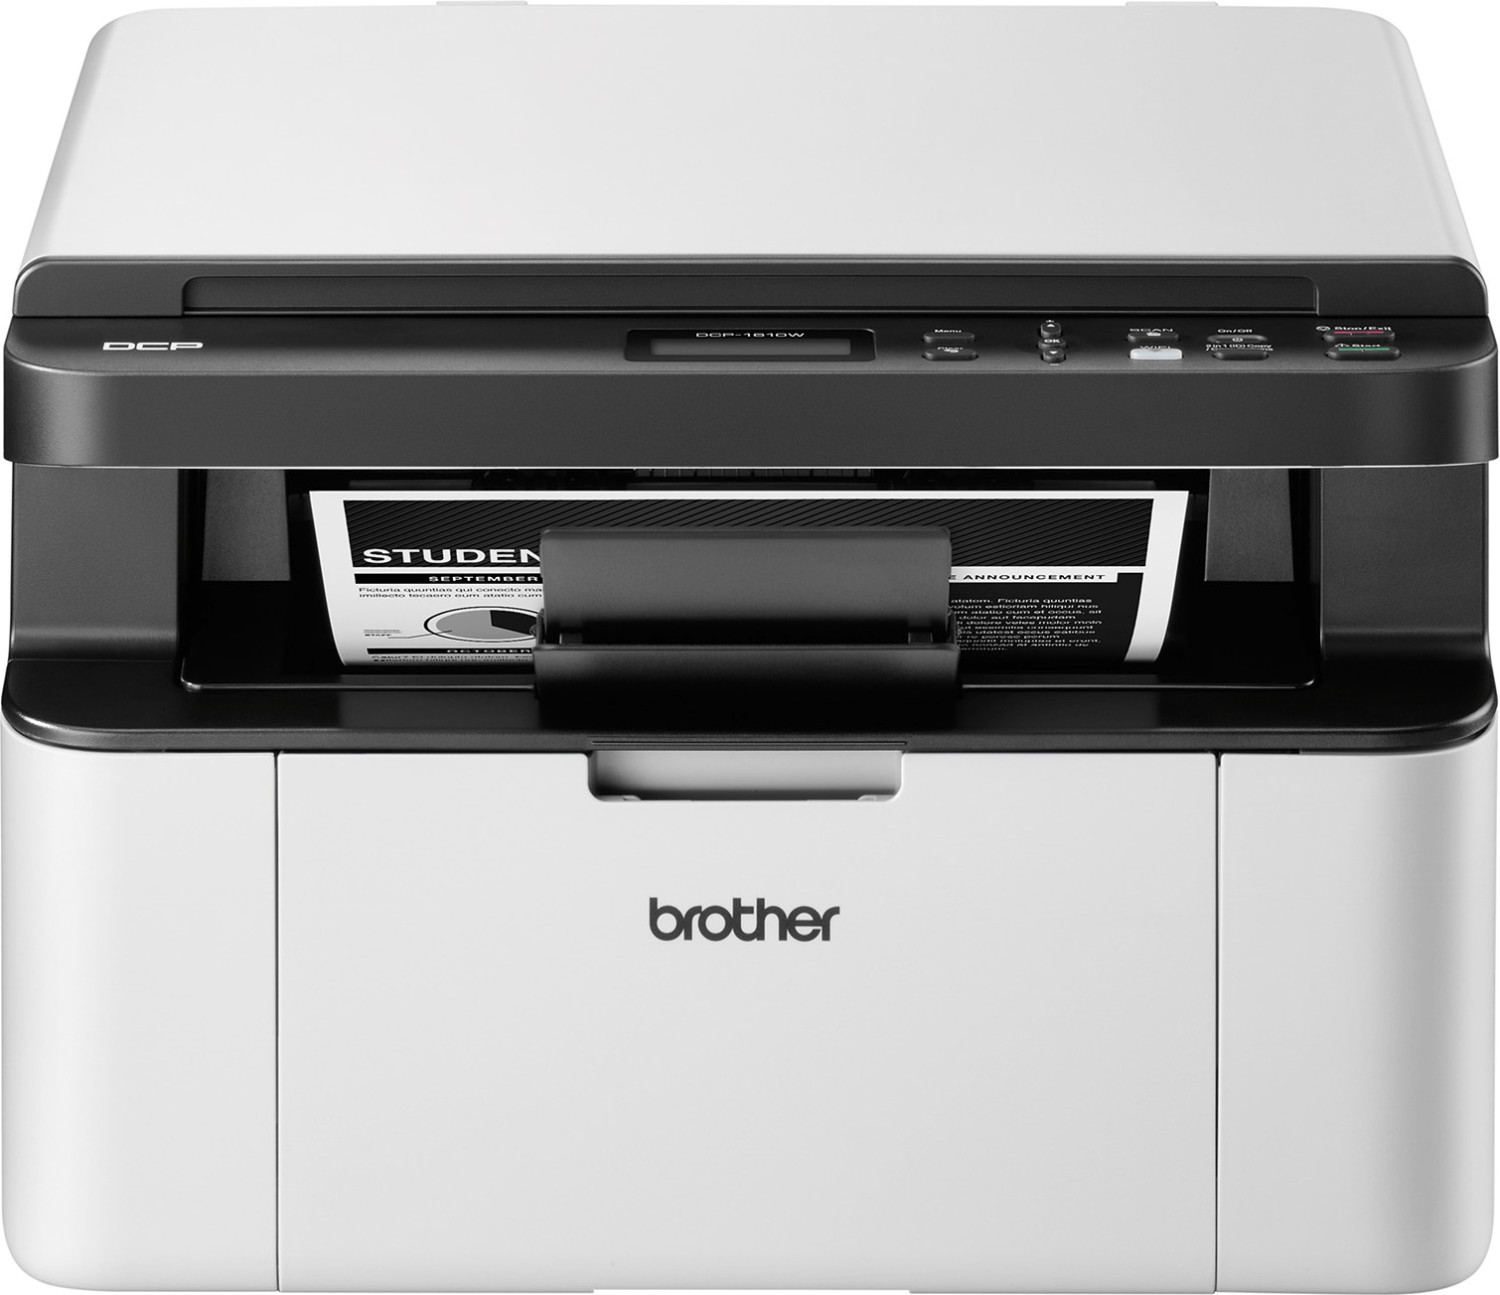 Brother DCP-1612W imprimante multifonction Laser A4 2400 x 600 DPI 20 ppm  Wifi